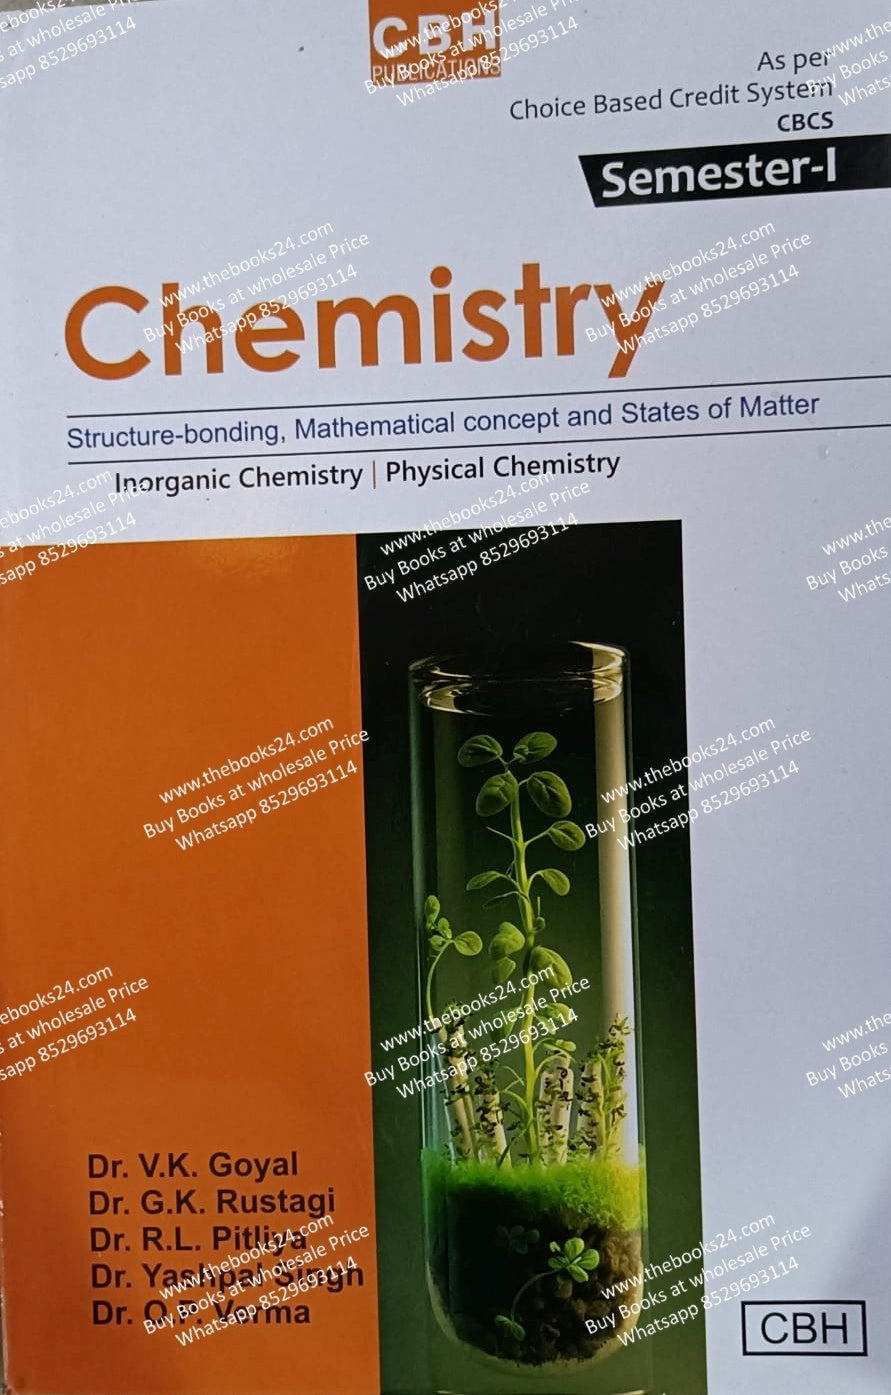 Cbh bsc 1st Semester Chemistry (Inorganic Chemistry/Physical Chemistry) Texbook